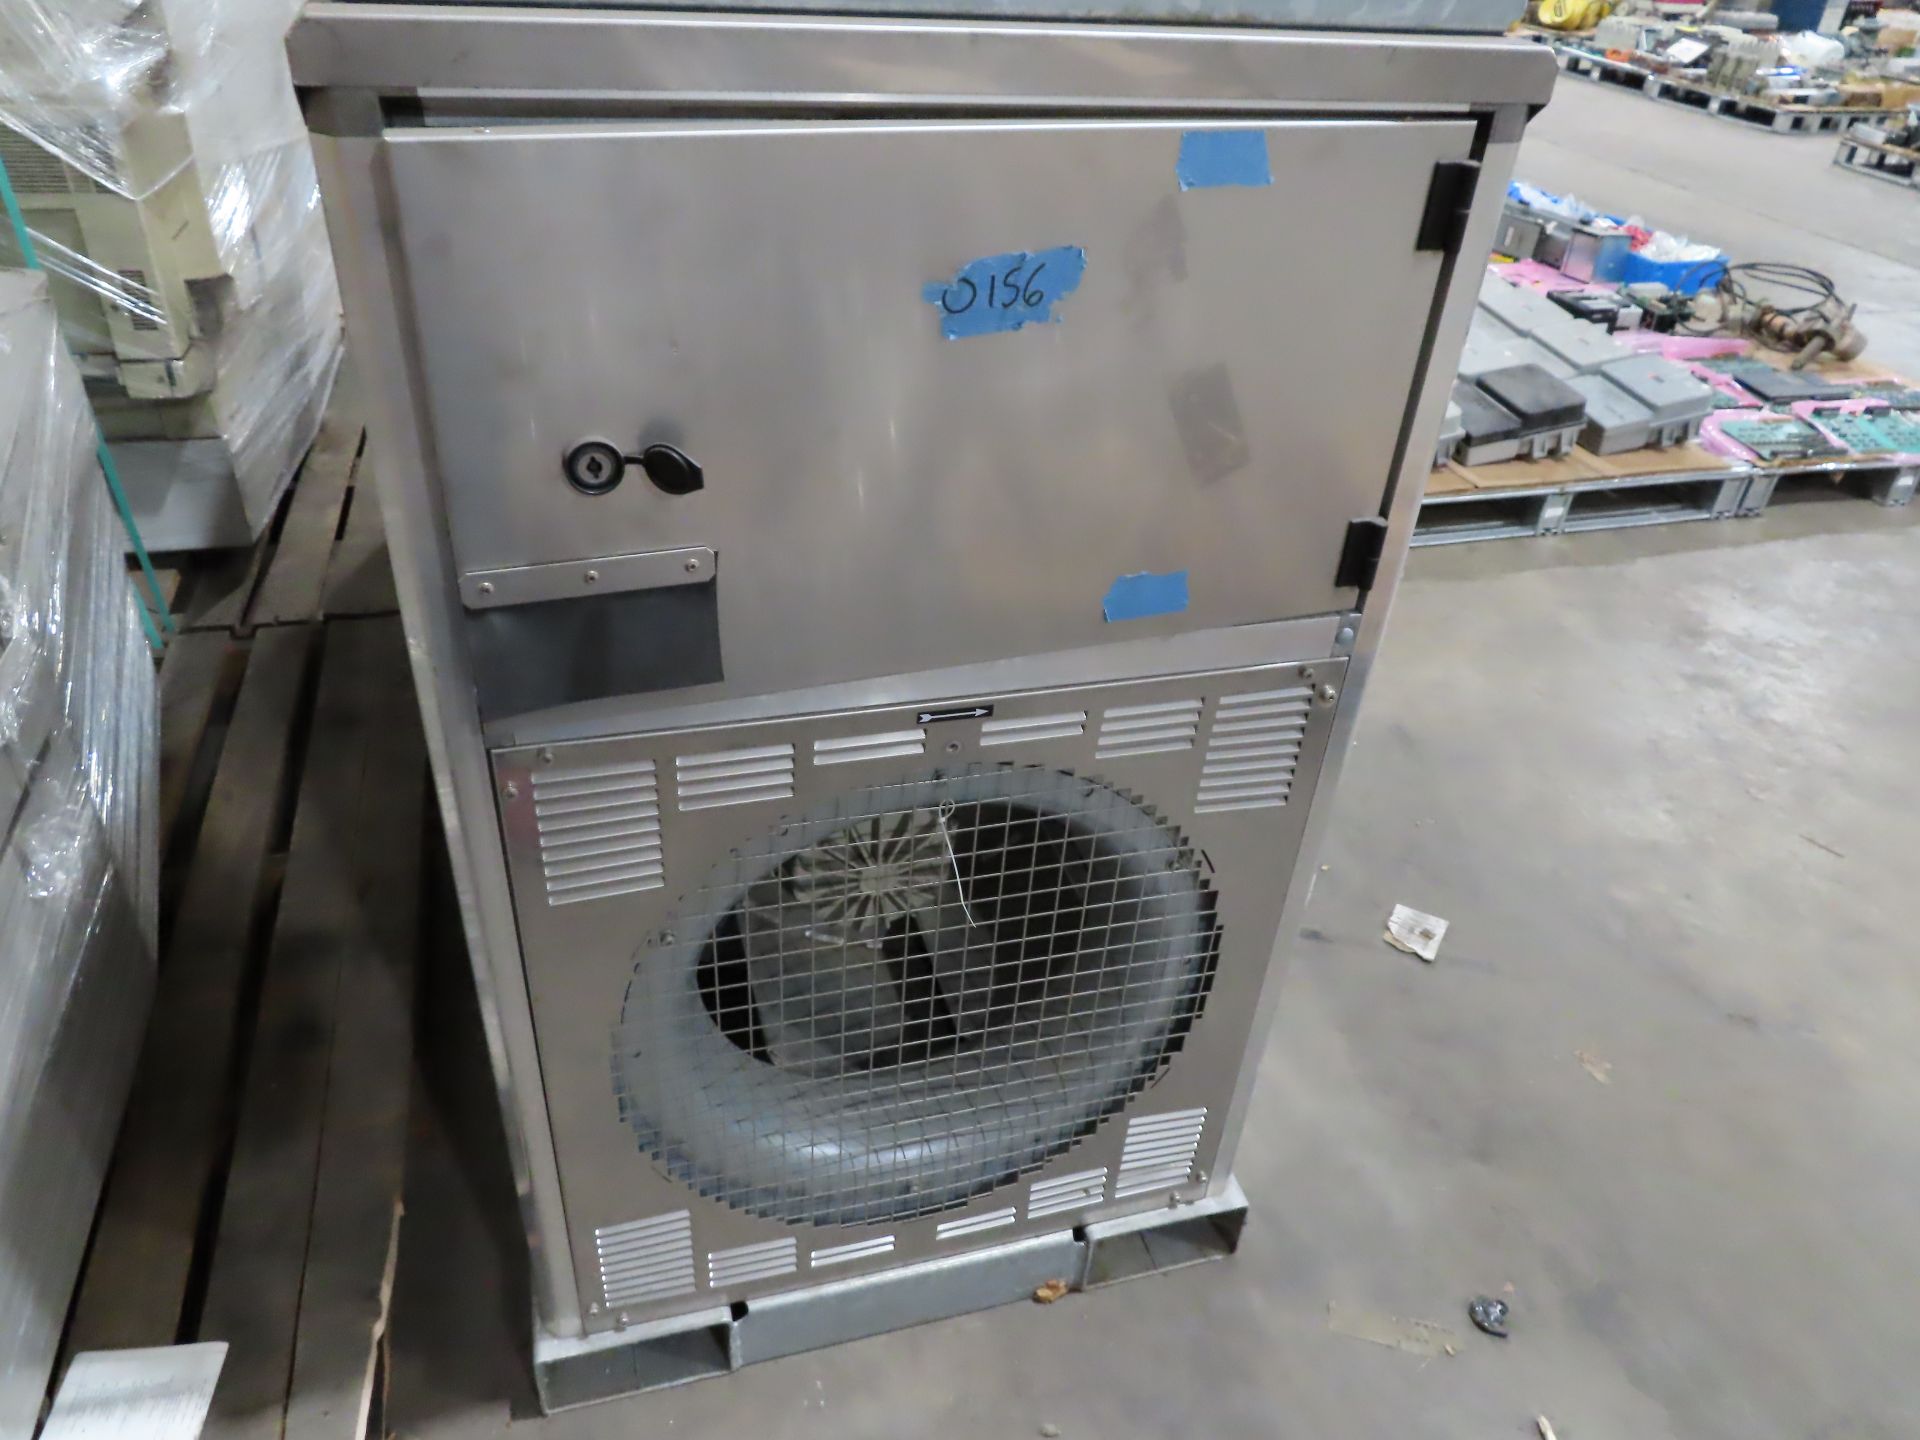 Thermobile Model IMAC-2000SG construction heater, 650,000btu, new old stock with zero hours, as - Image 2 of 7